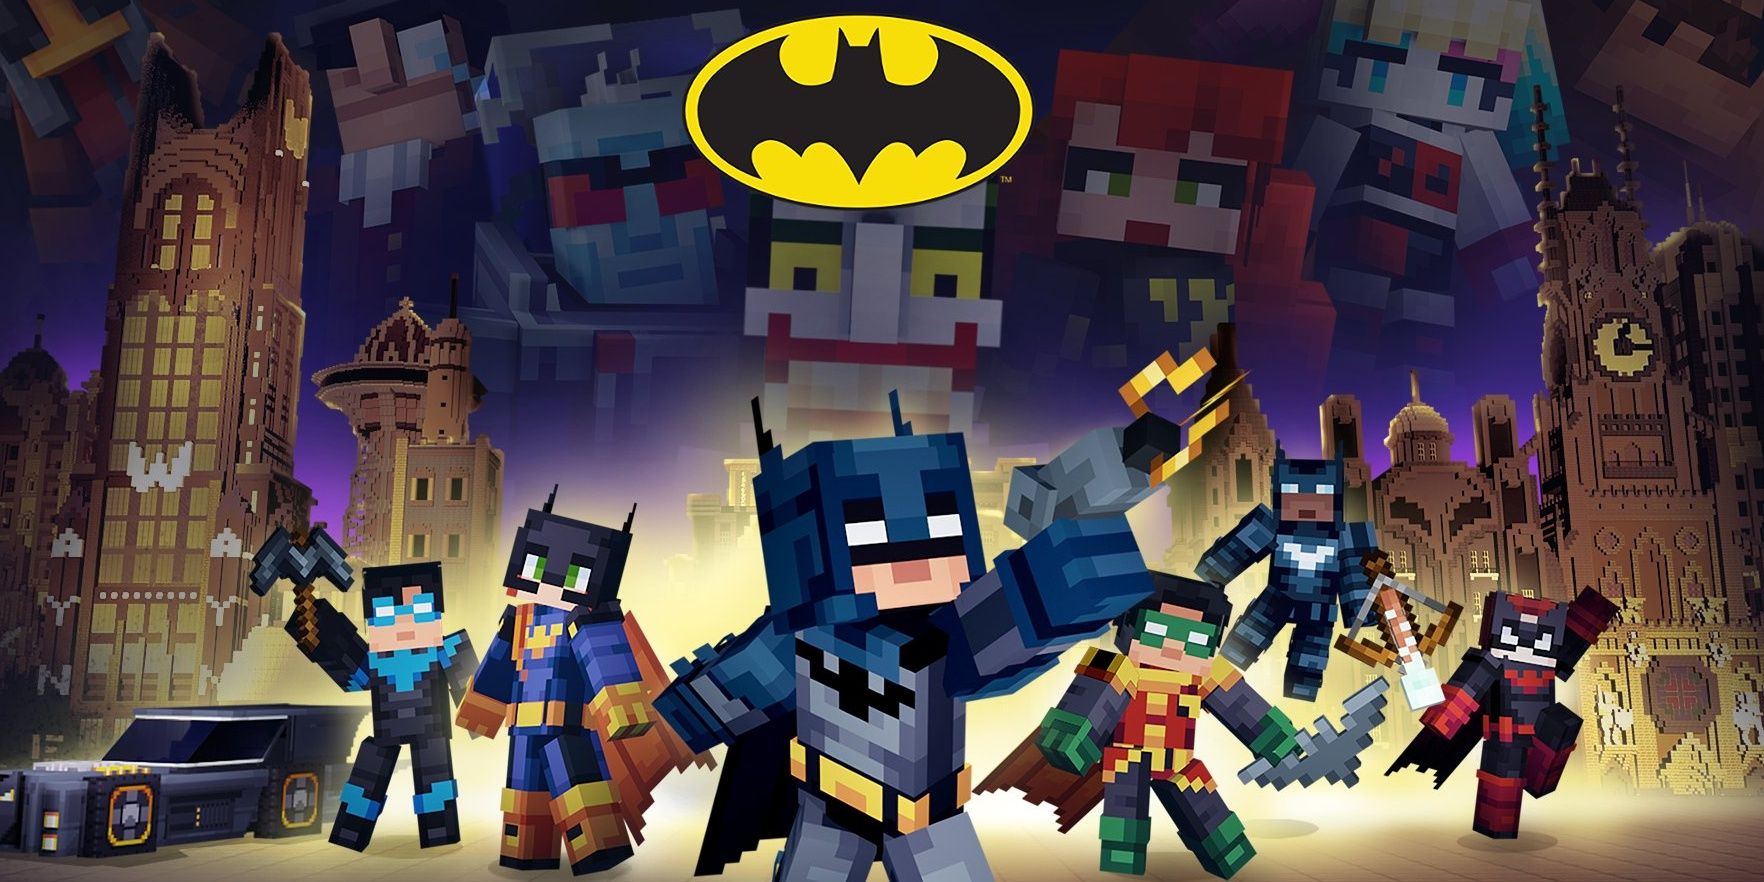 Minecraft Announces Batman DLC Featuring Nightwing, Batgirl and More